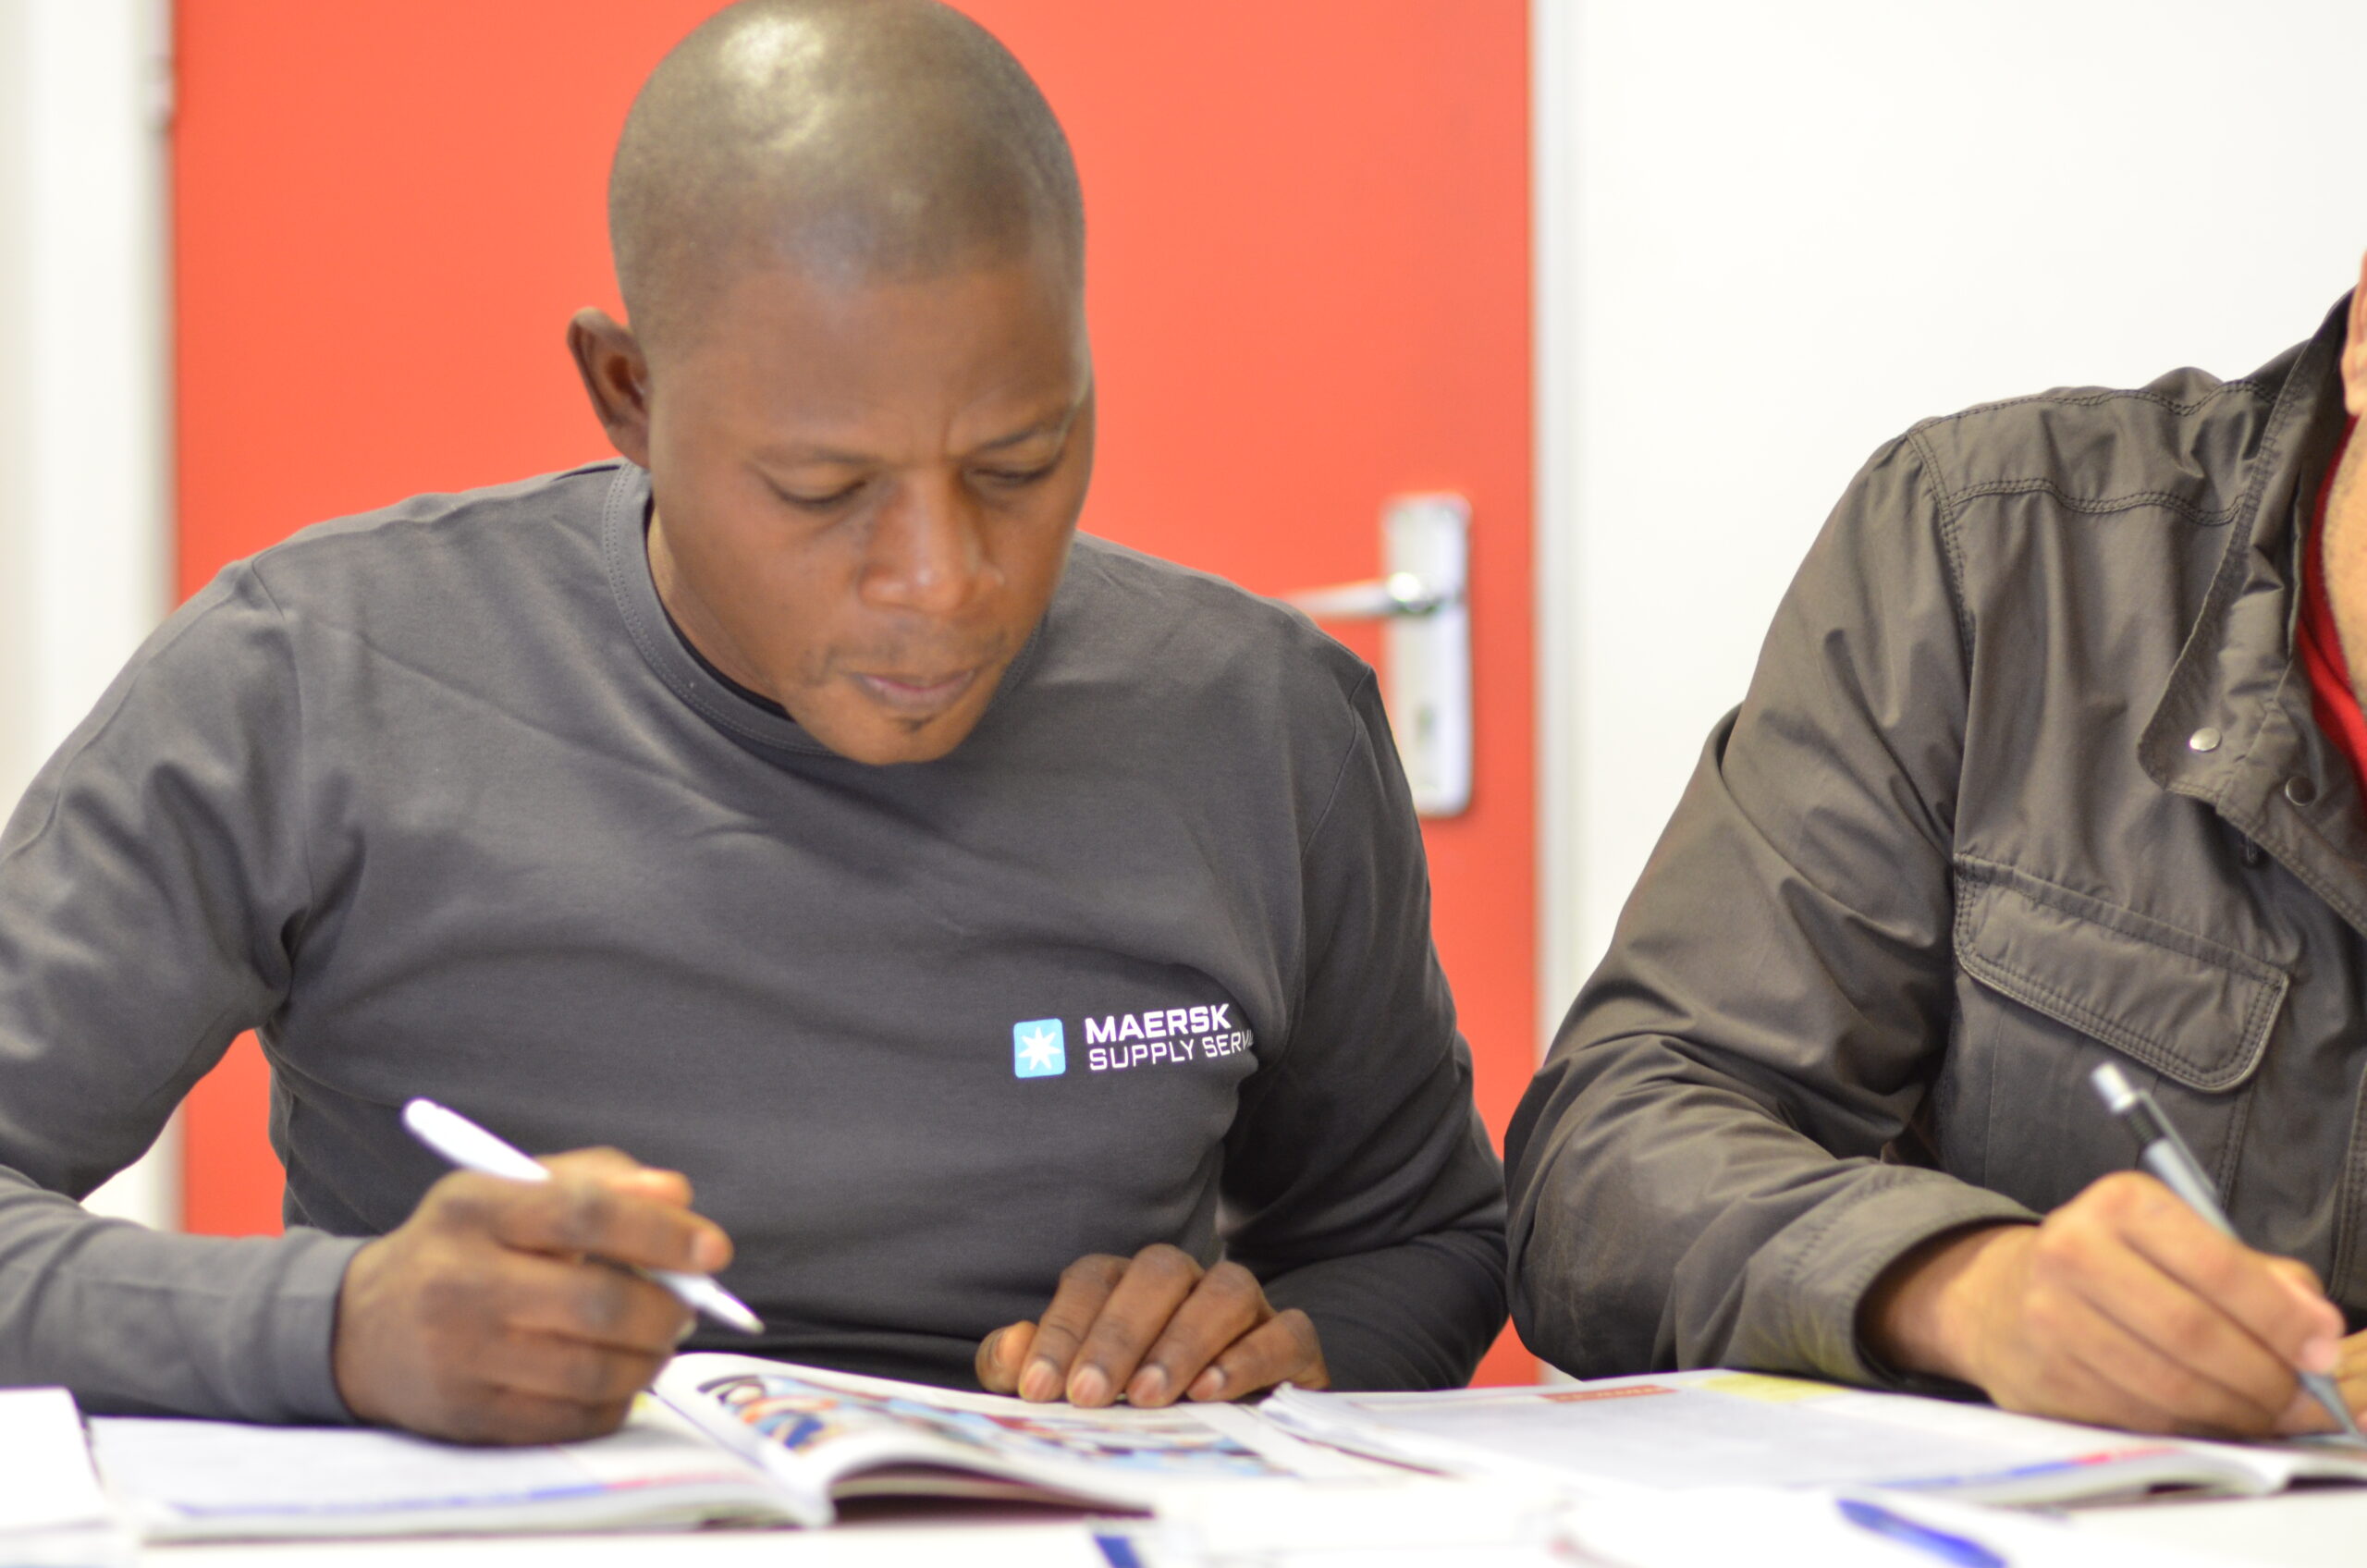 Maersk Supply service local knowledge in Africa